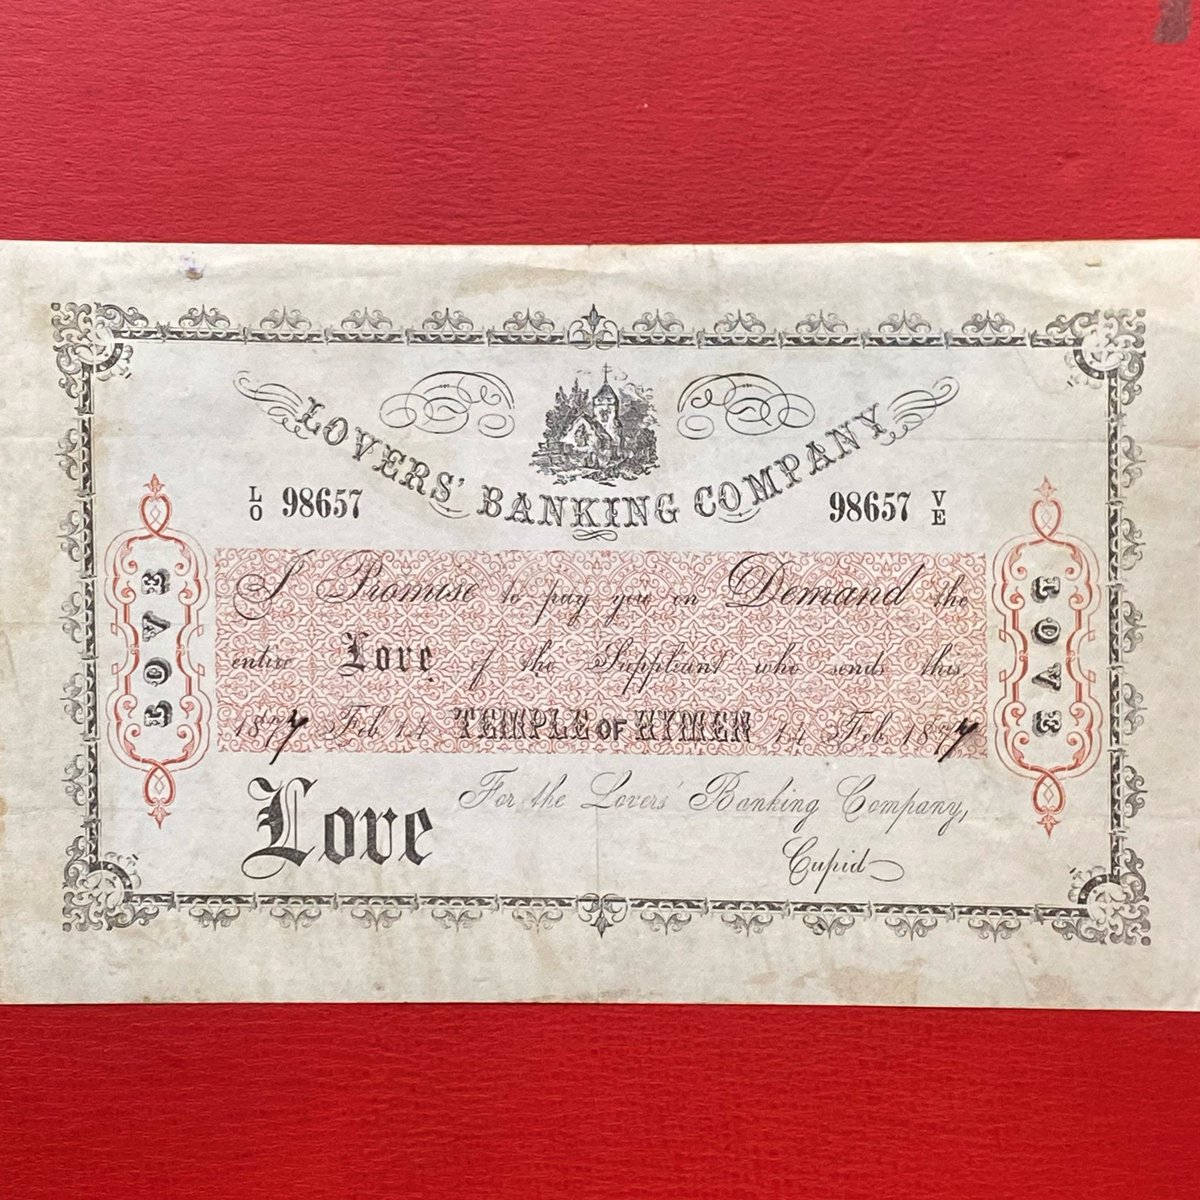 #lovers #banking company, signed by #cupid of course 😉❤️🥰 #banknote #auction on 24 February 
dnw.co.uk #skitnote #skitnotes #papermoney #notaphily #design